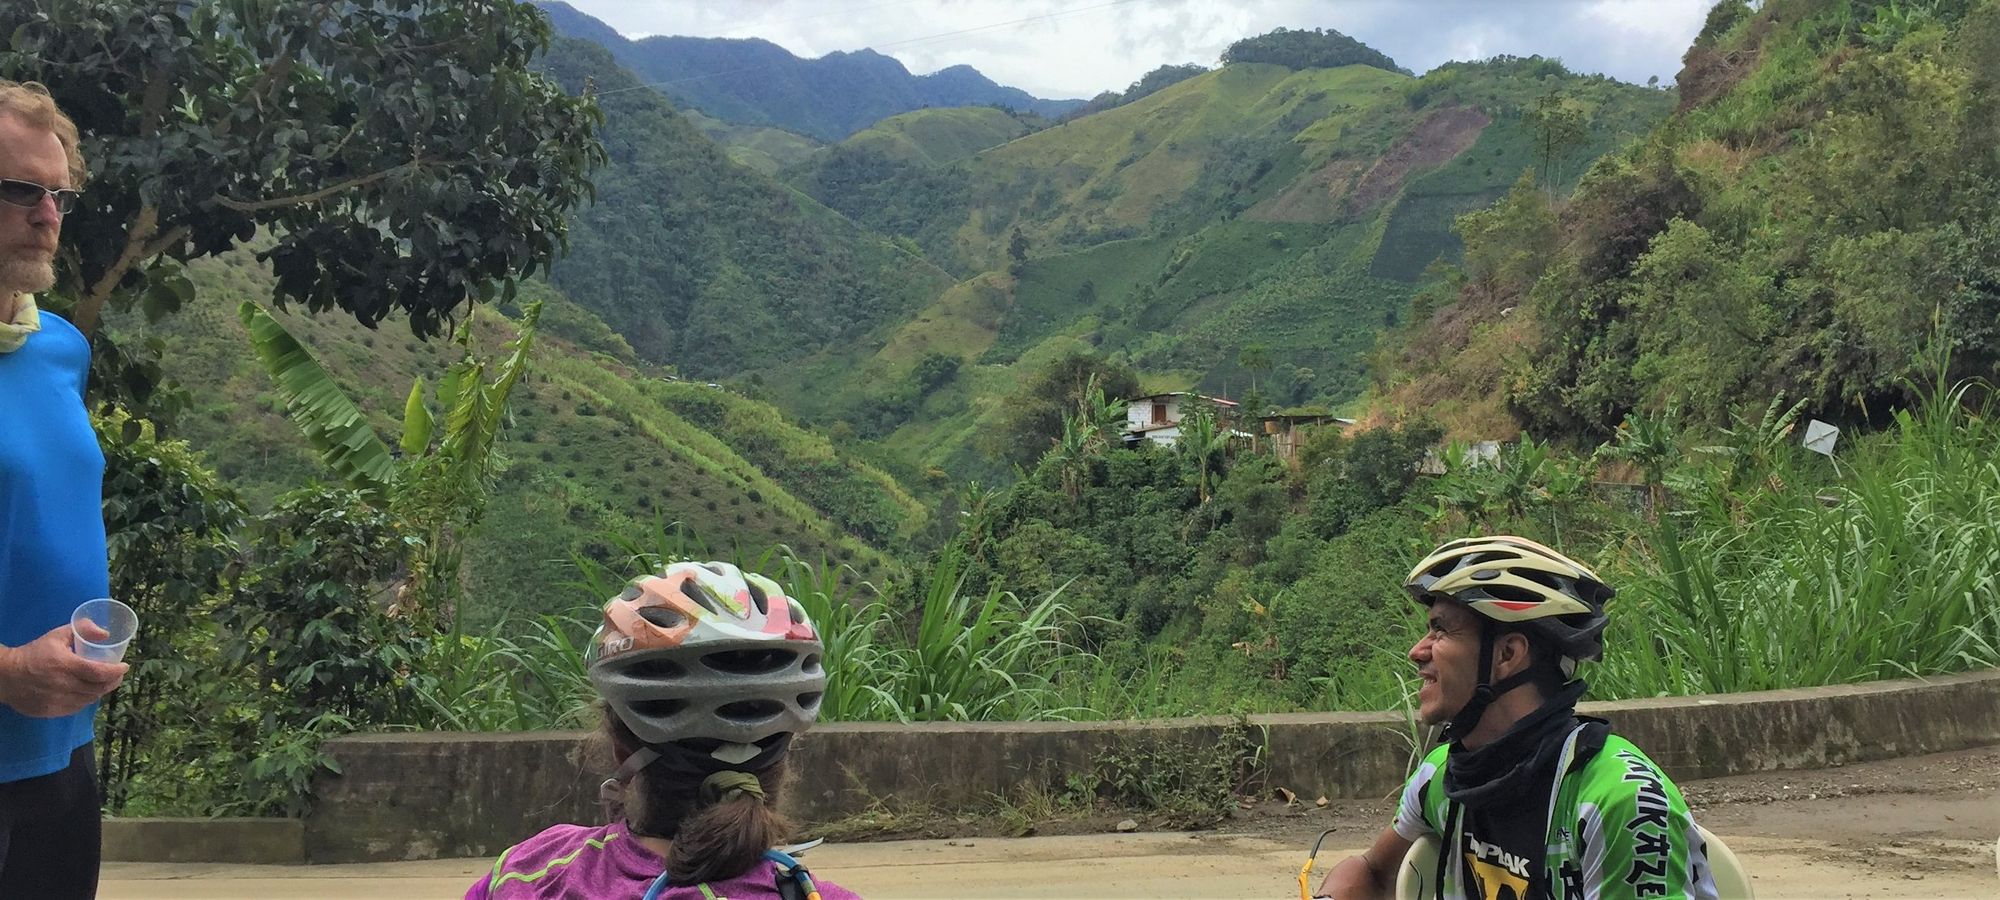 Cycling Holidays Colombia